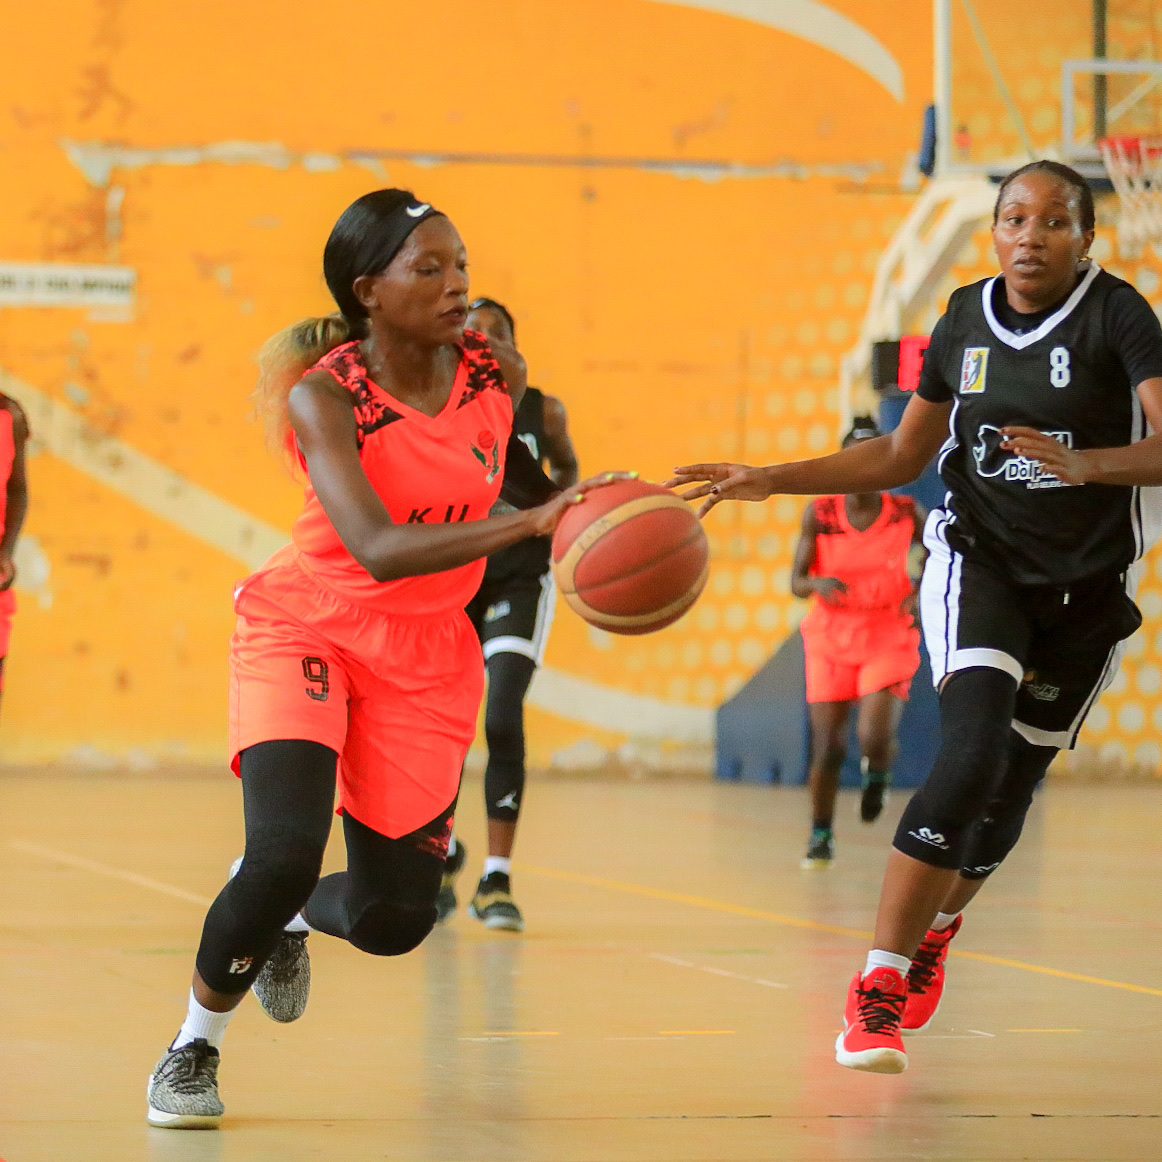 It's Basketball time - Sunday. When your primary motivation is extrinsic, you may sense a greater amount of competitive pressure and anxiety #NBL23 @NBL_Uganda Kampala University  Vs  JKL Lady Dolphins. @NBSportUg @andrewkabuura @GabrielBuule @kawowosports .